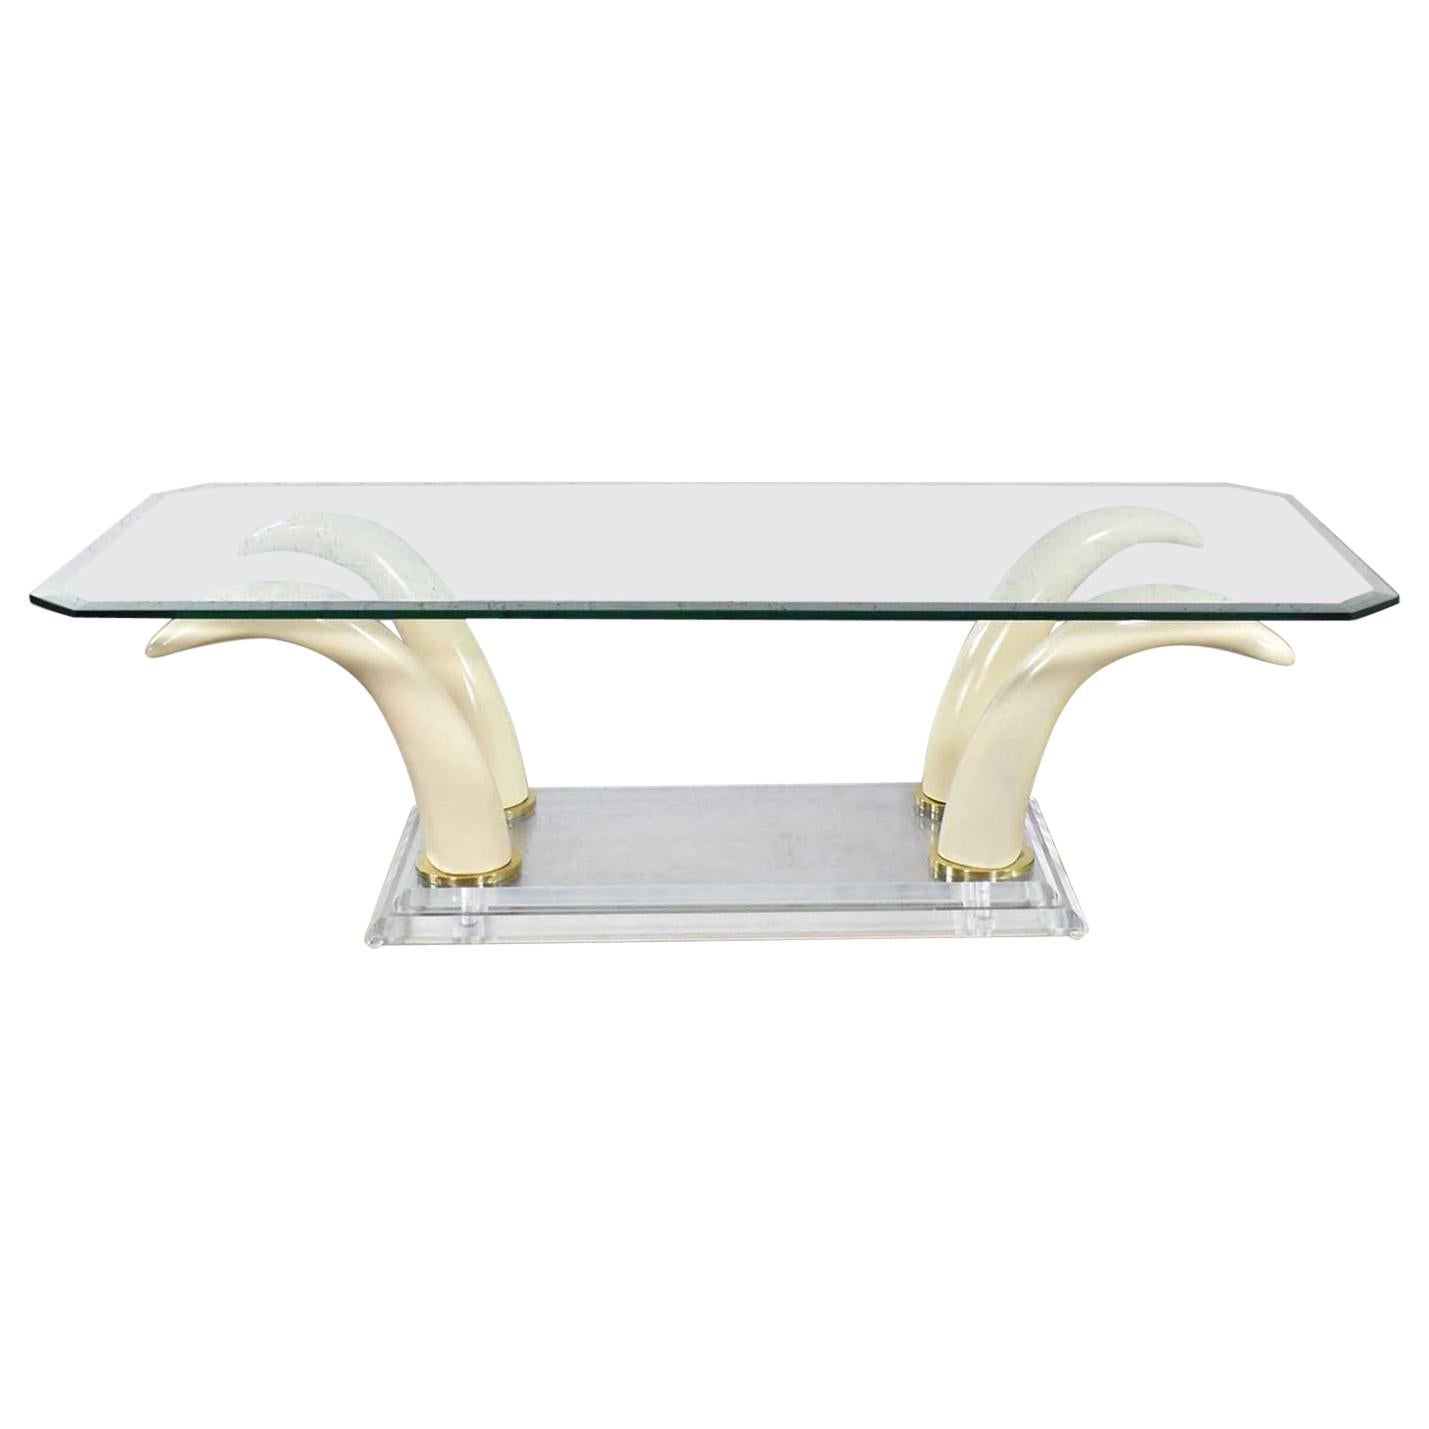 Lucite Acrylic and Glass Faux Tusk Coffee Cocktail Table after Maison Jansen